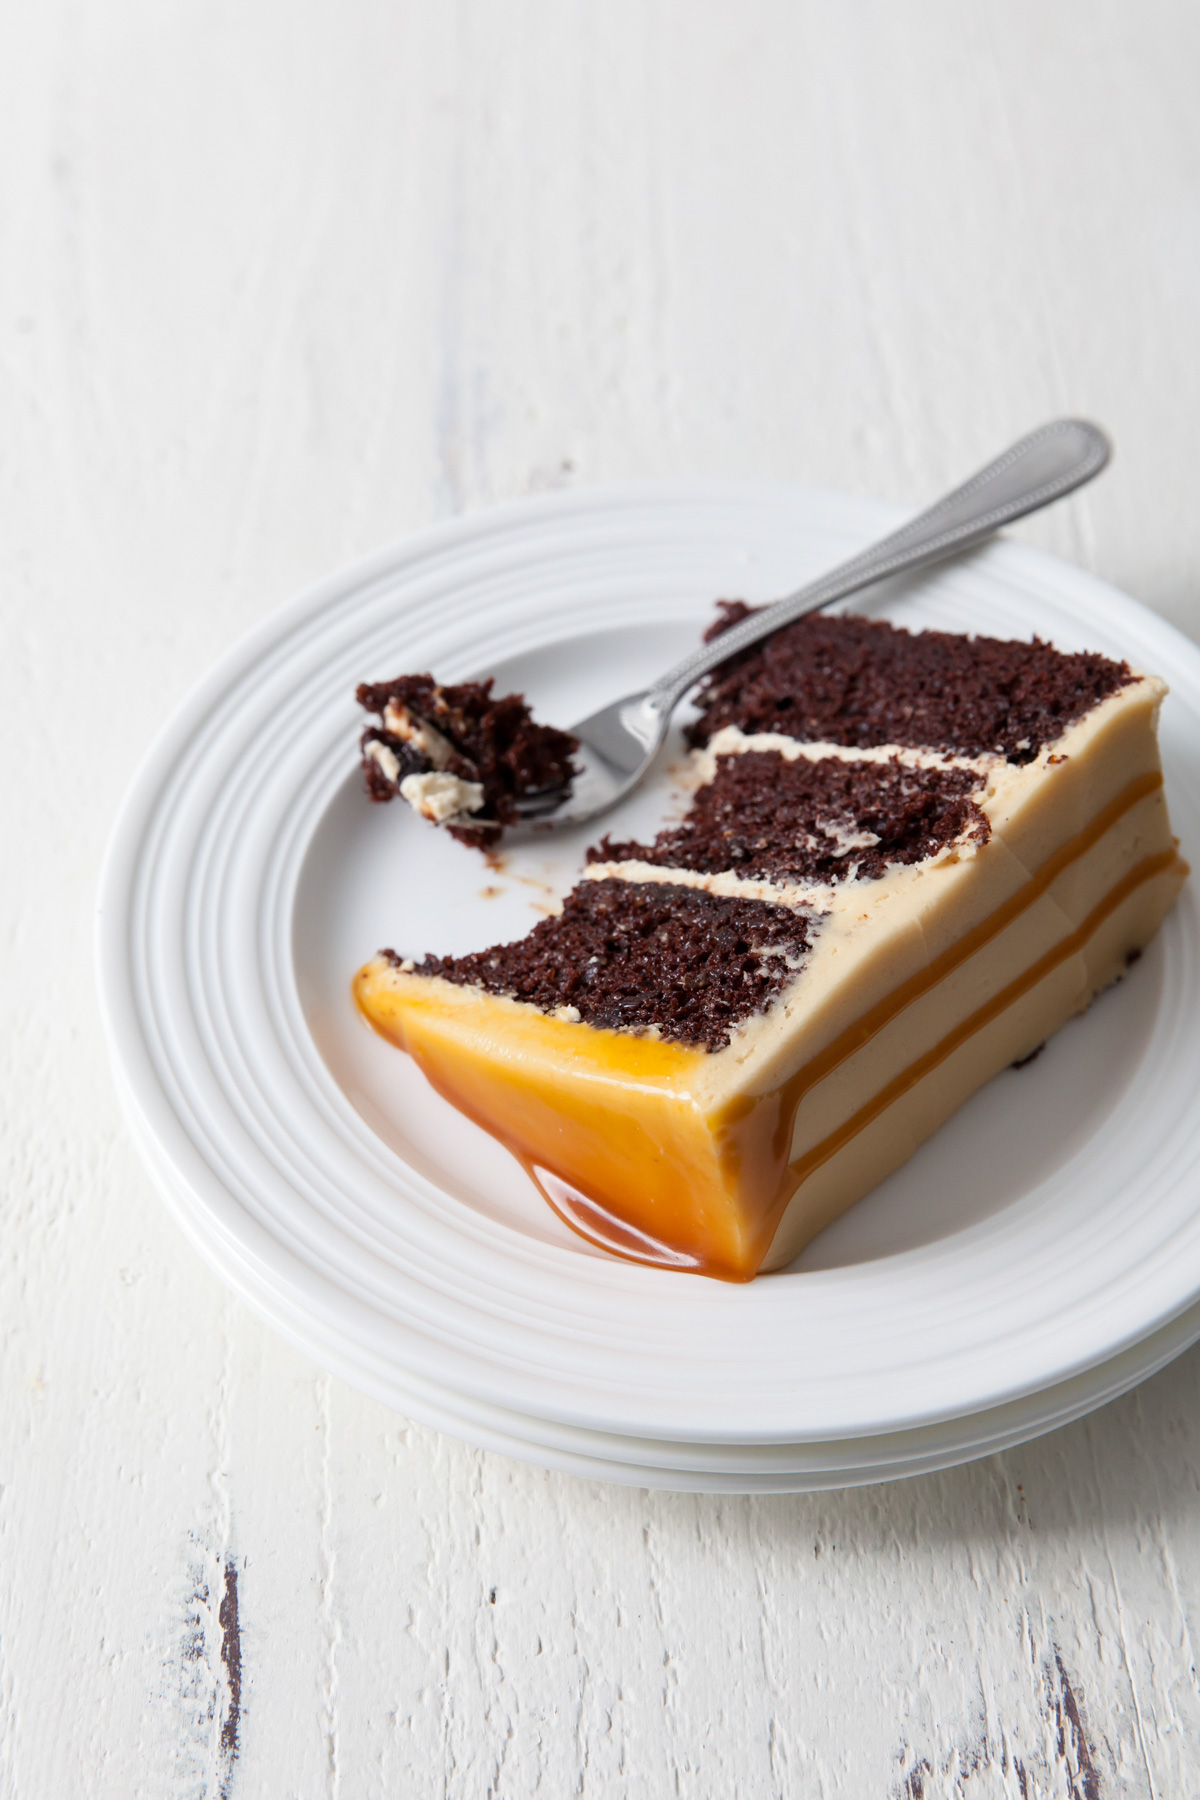 A slice of three layer chocolate cake with caramel frosting being eaten on a plate